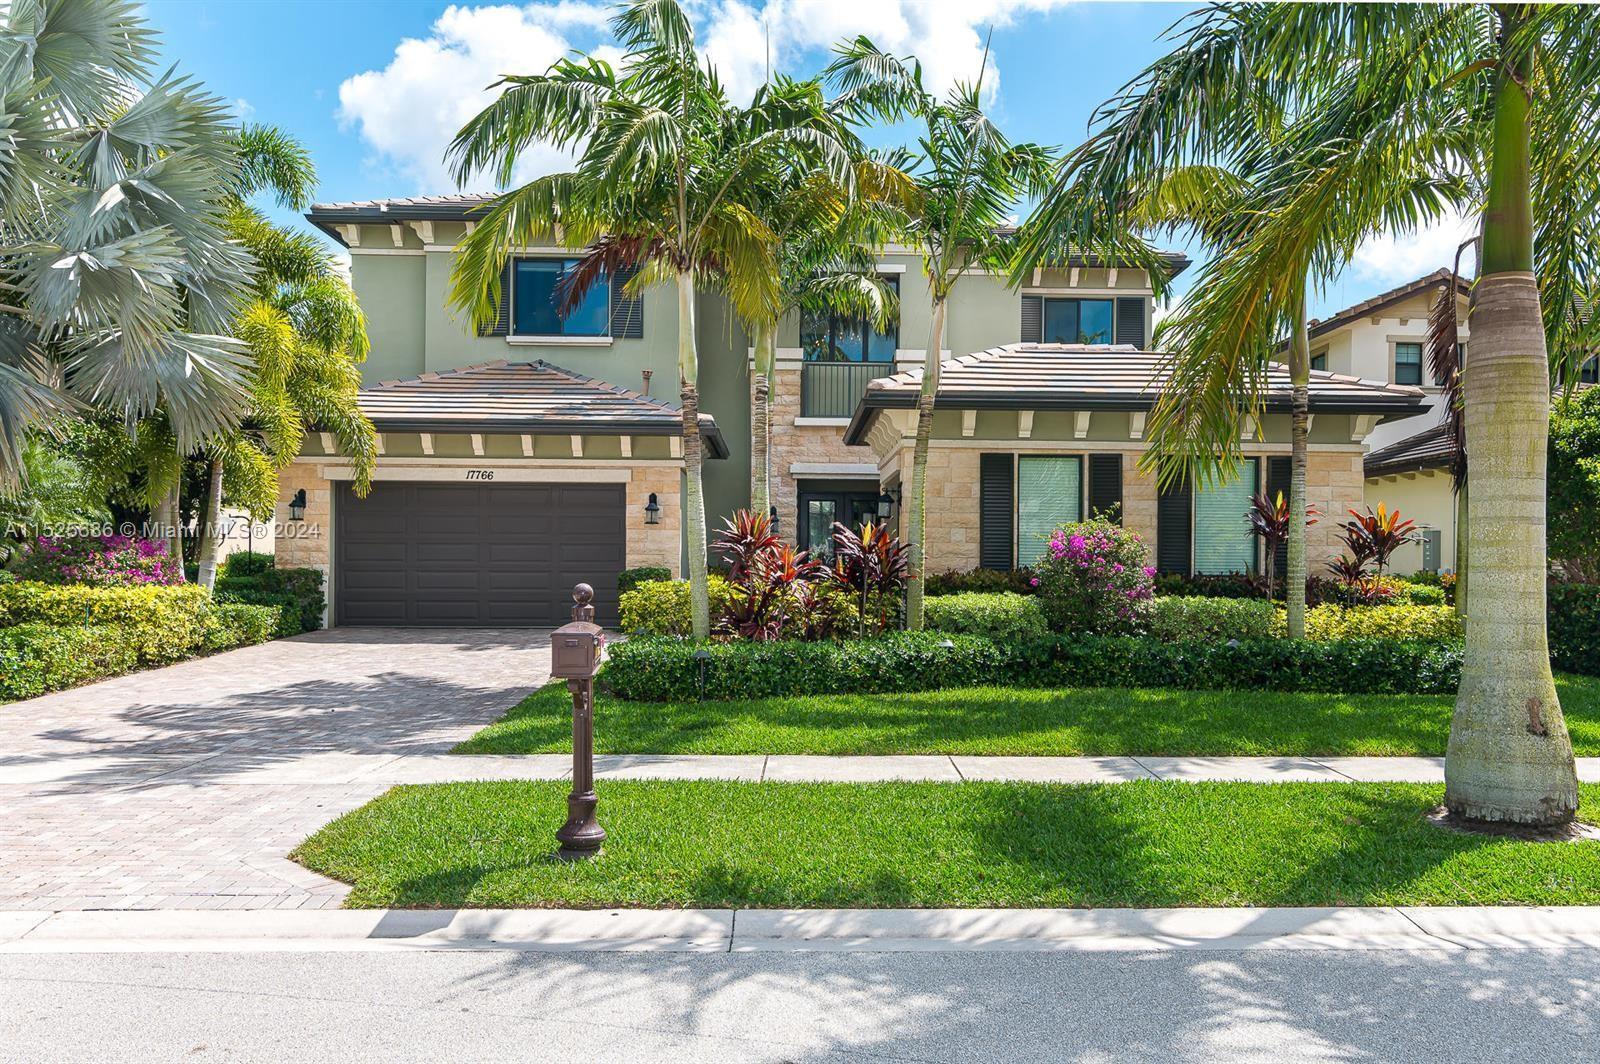 A RARE OPPORTUNITY TO OWN A HIGHLY DESIRABLE AVONDALE MODEL IN ONE OF BOCA'S MOST PRESTIGIOUS NEIGHB